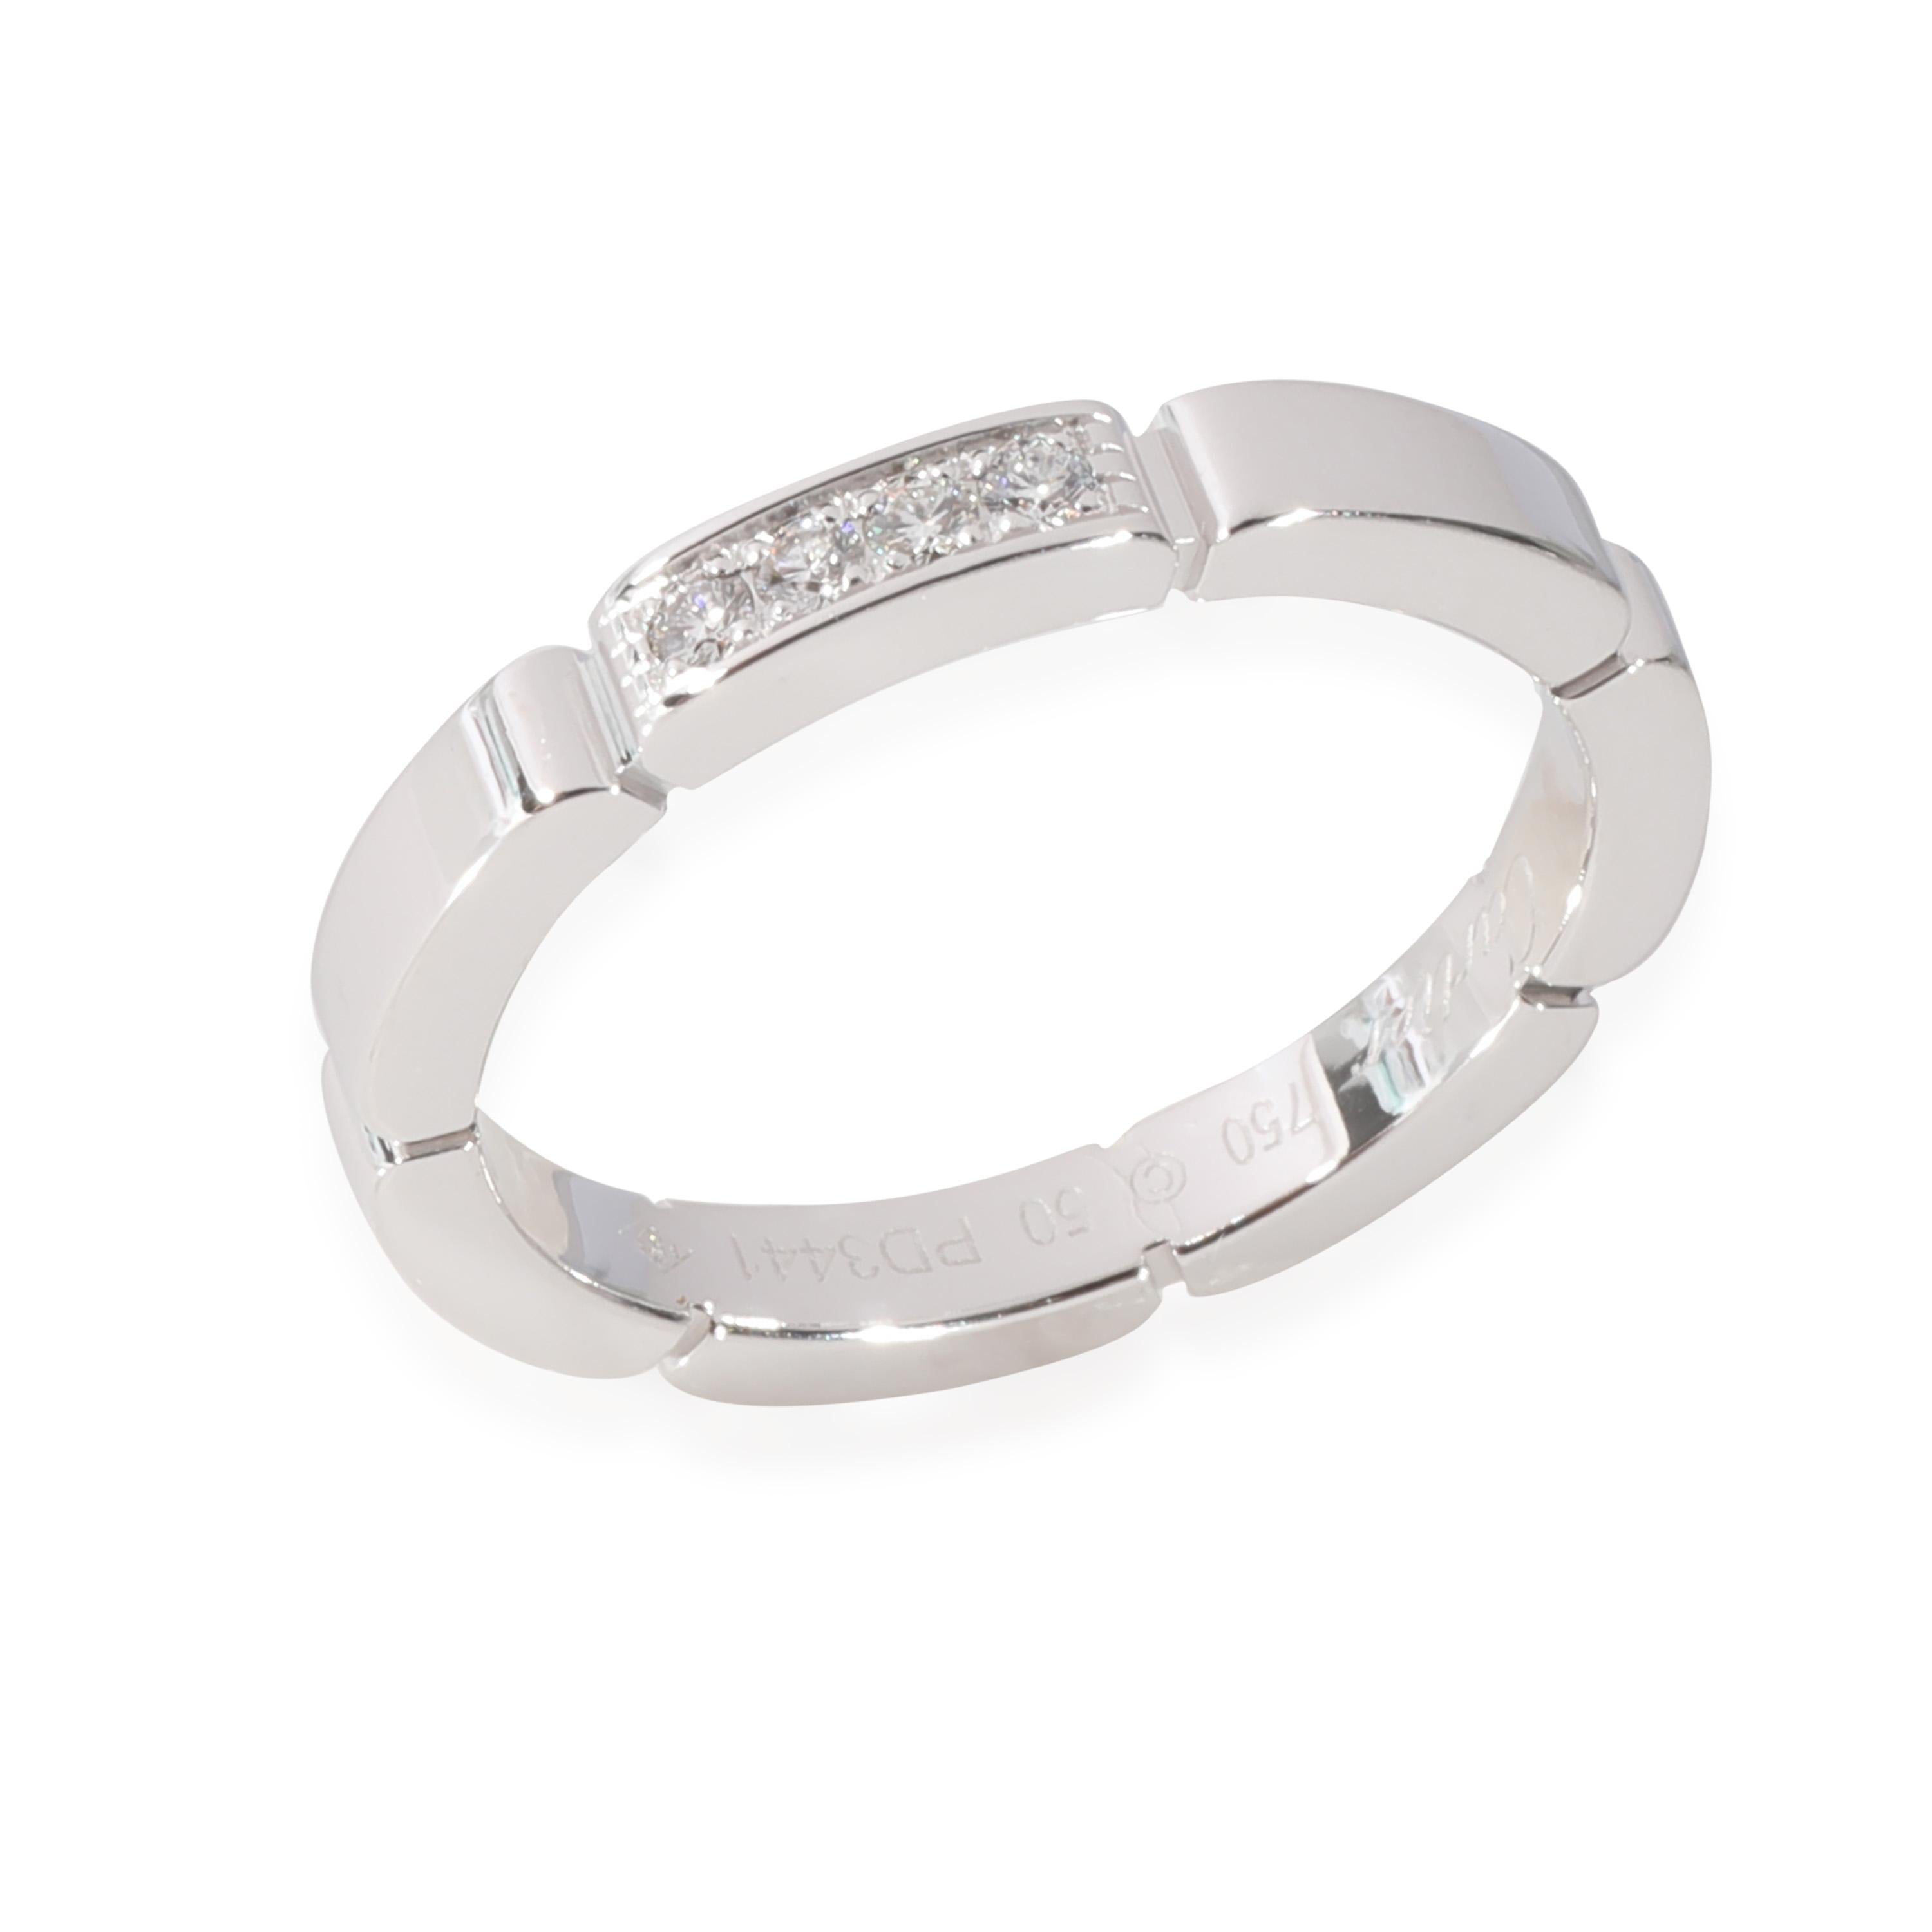 Cartier Maillon Panthere Diamond Band in Platinum 0.05 CTW

PRIMARY DETAILS
SKU: 125352
Listing Title: Cartier Maillon Panthere Diamond Band in Platinum 0.05 CTW
Condition Description: Retails for 2030 USD. In excellent condition and recently